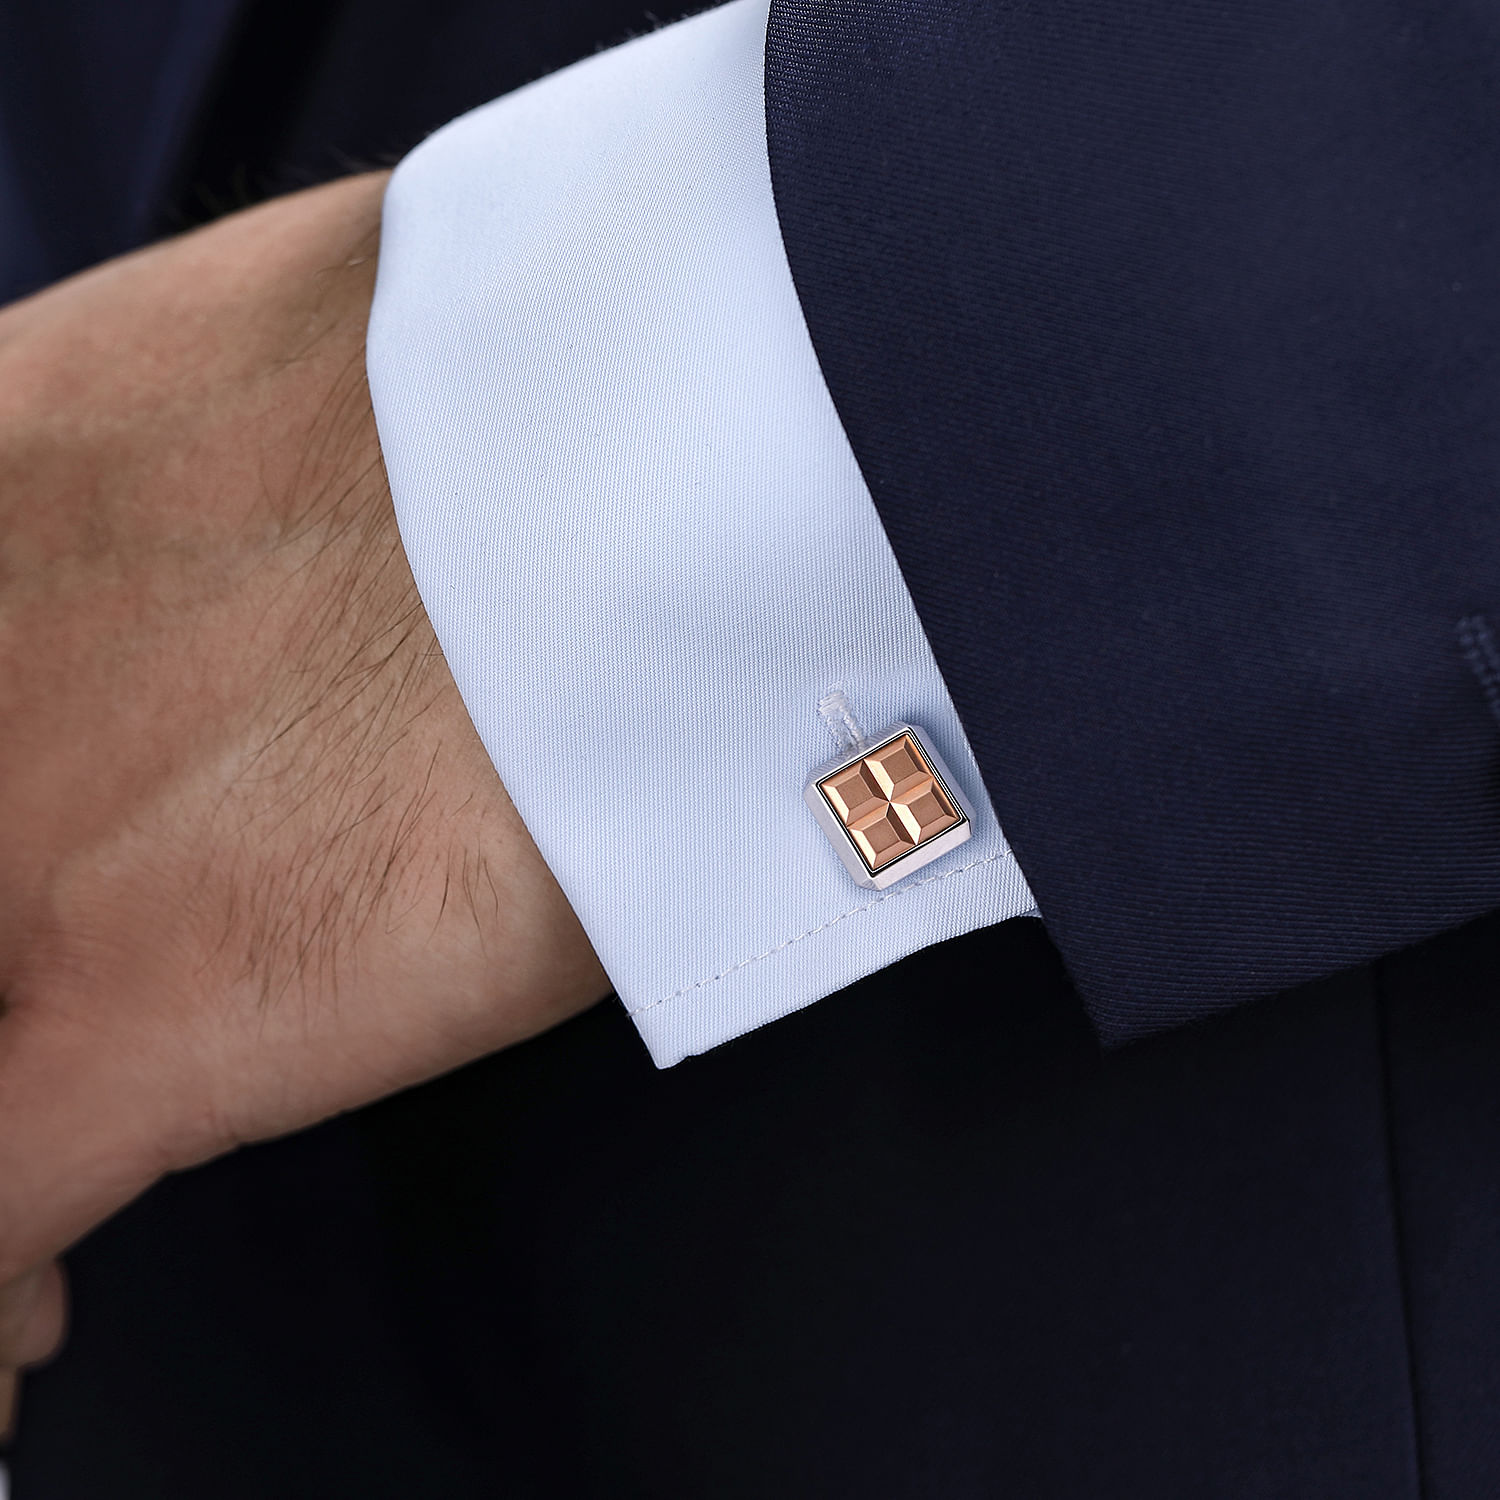 925 Sterling Silver Square Cufflinks with 14K Rose Gold Squares